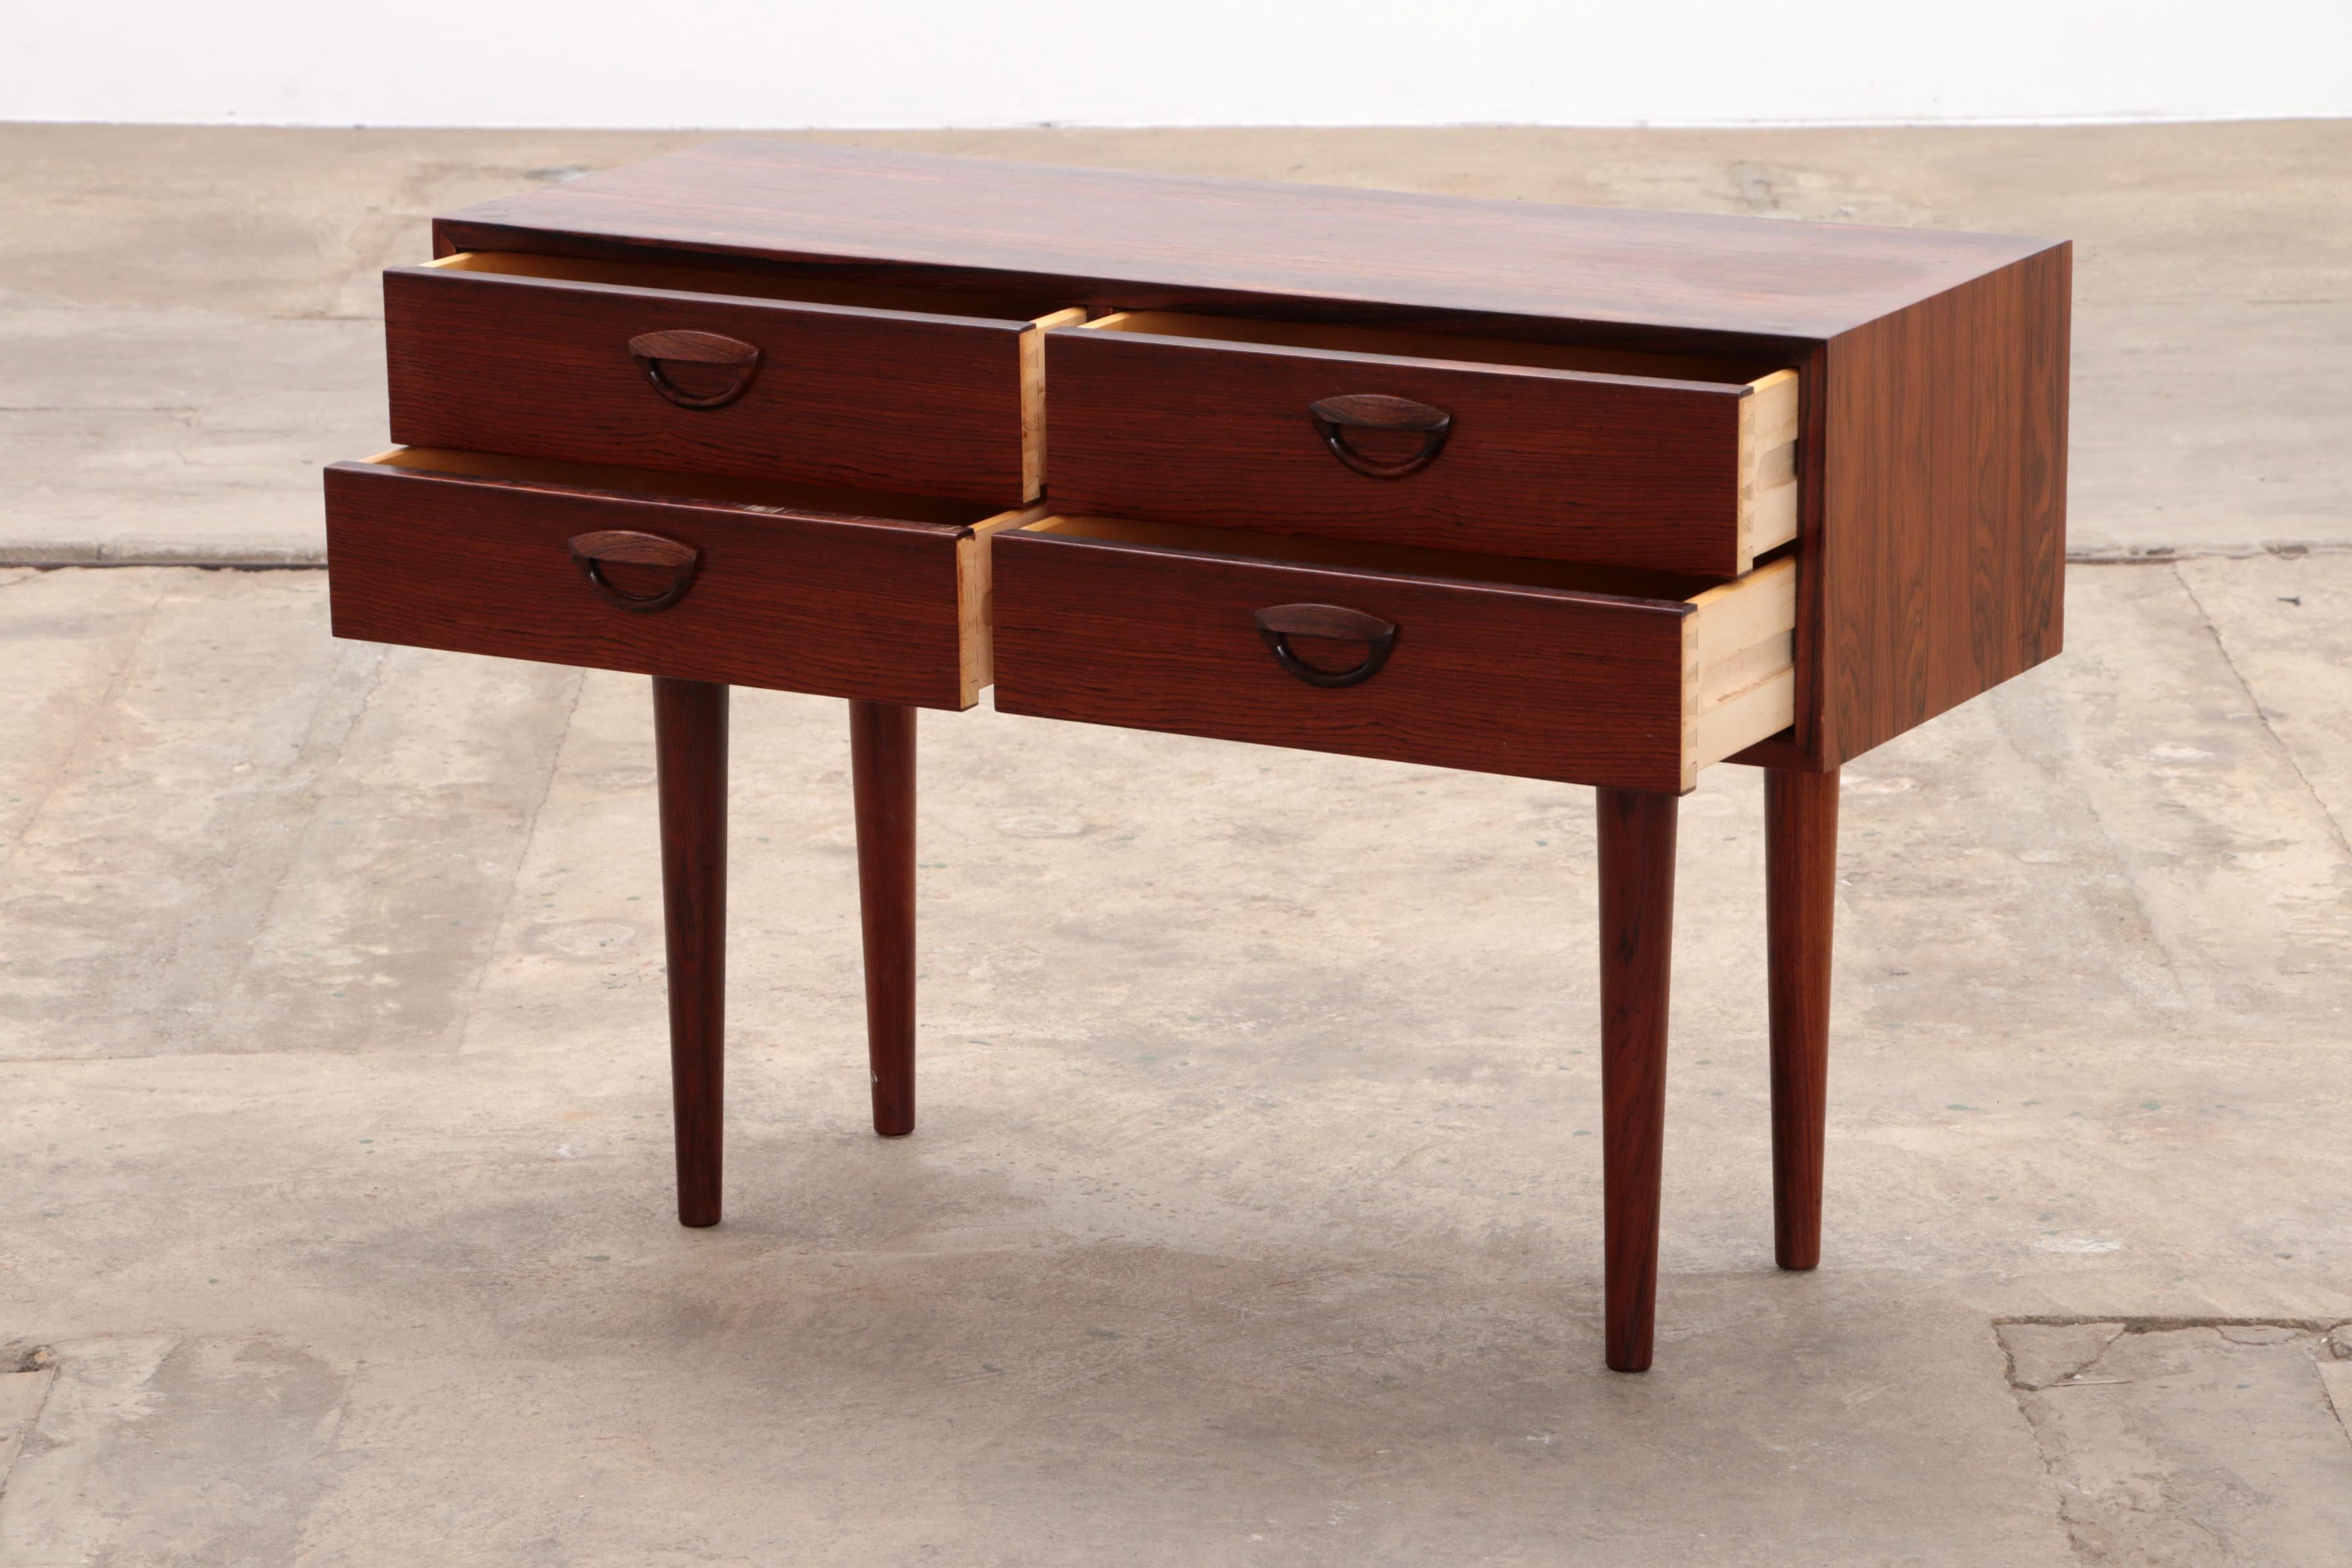 Mid-20th Century Danish Sideboard by Kai Kristiansen for FM Møbler, 1960s For Sale